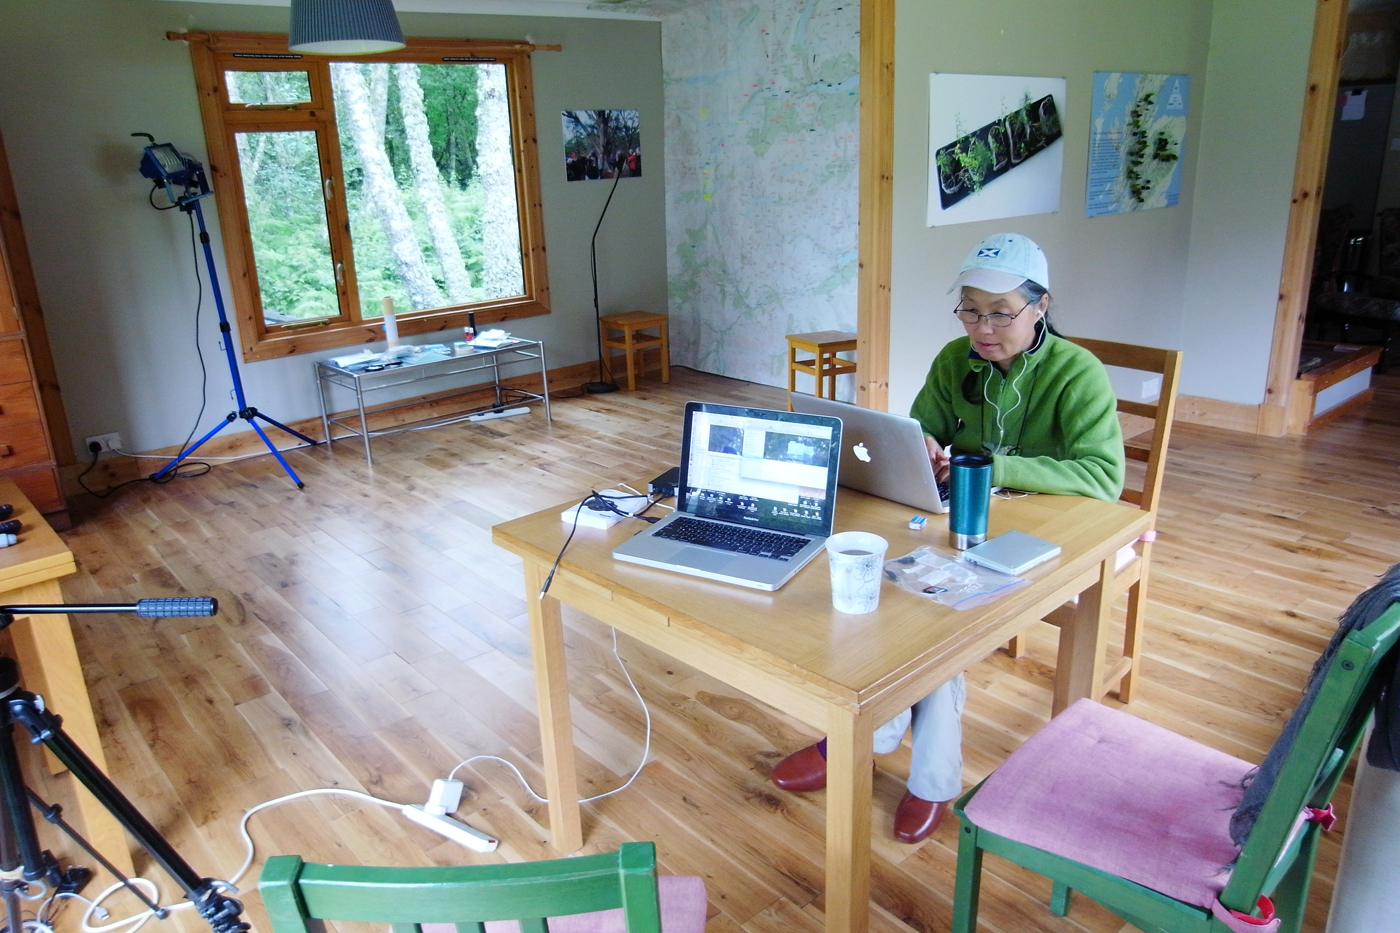 An intensive Residency at Dall Mill at the edge of the Black Wood in Rannoch.